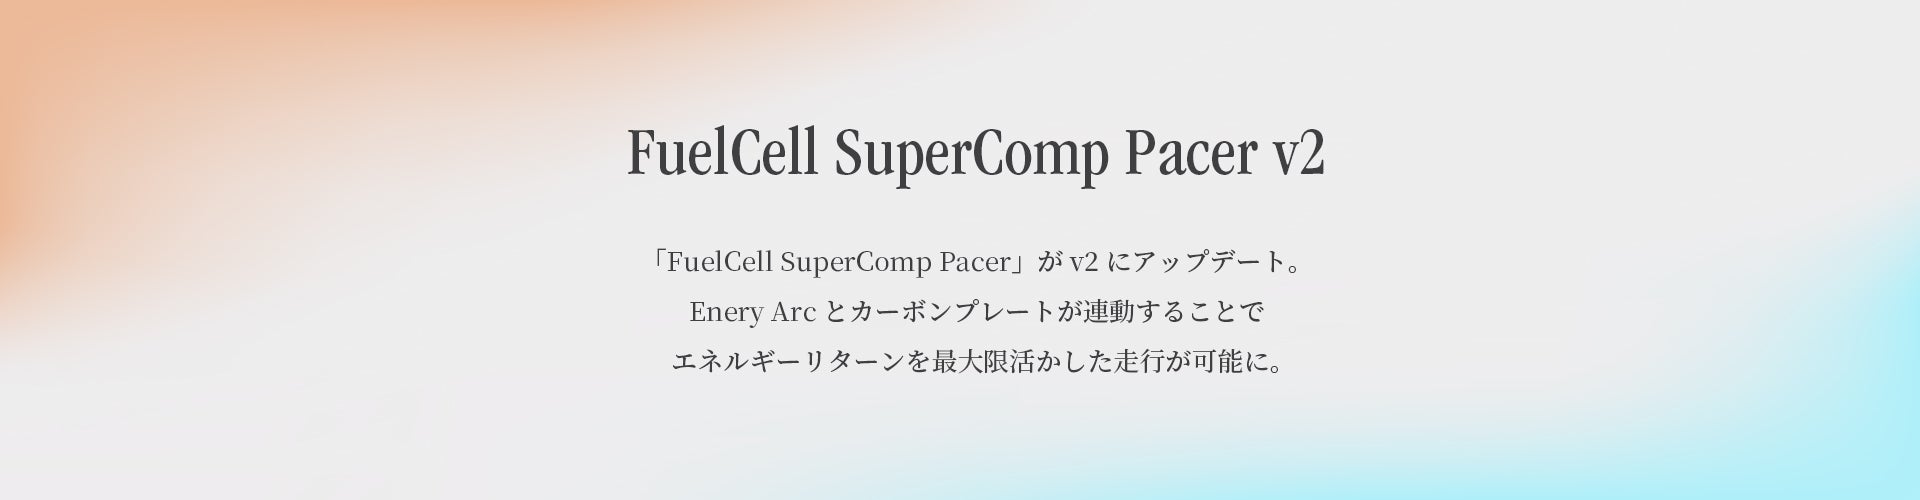 FuelCell SuperComp Pacer v2 「FuelCell SuperComp Pacer」がv2にアップデート。Enery Arcとカーボンプレートが連動することでエネルギーリターンを最大限活かした走行が可能に。